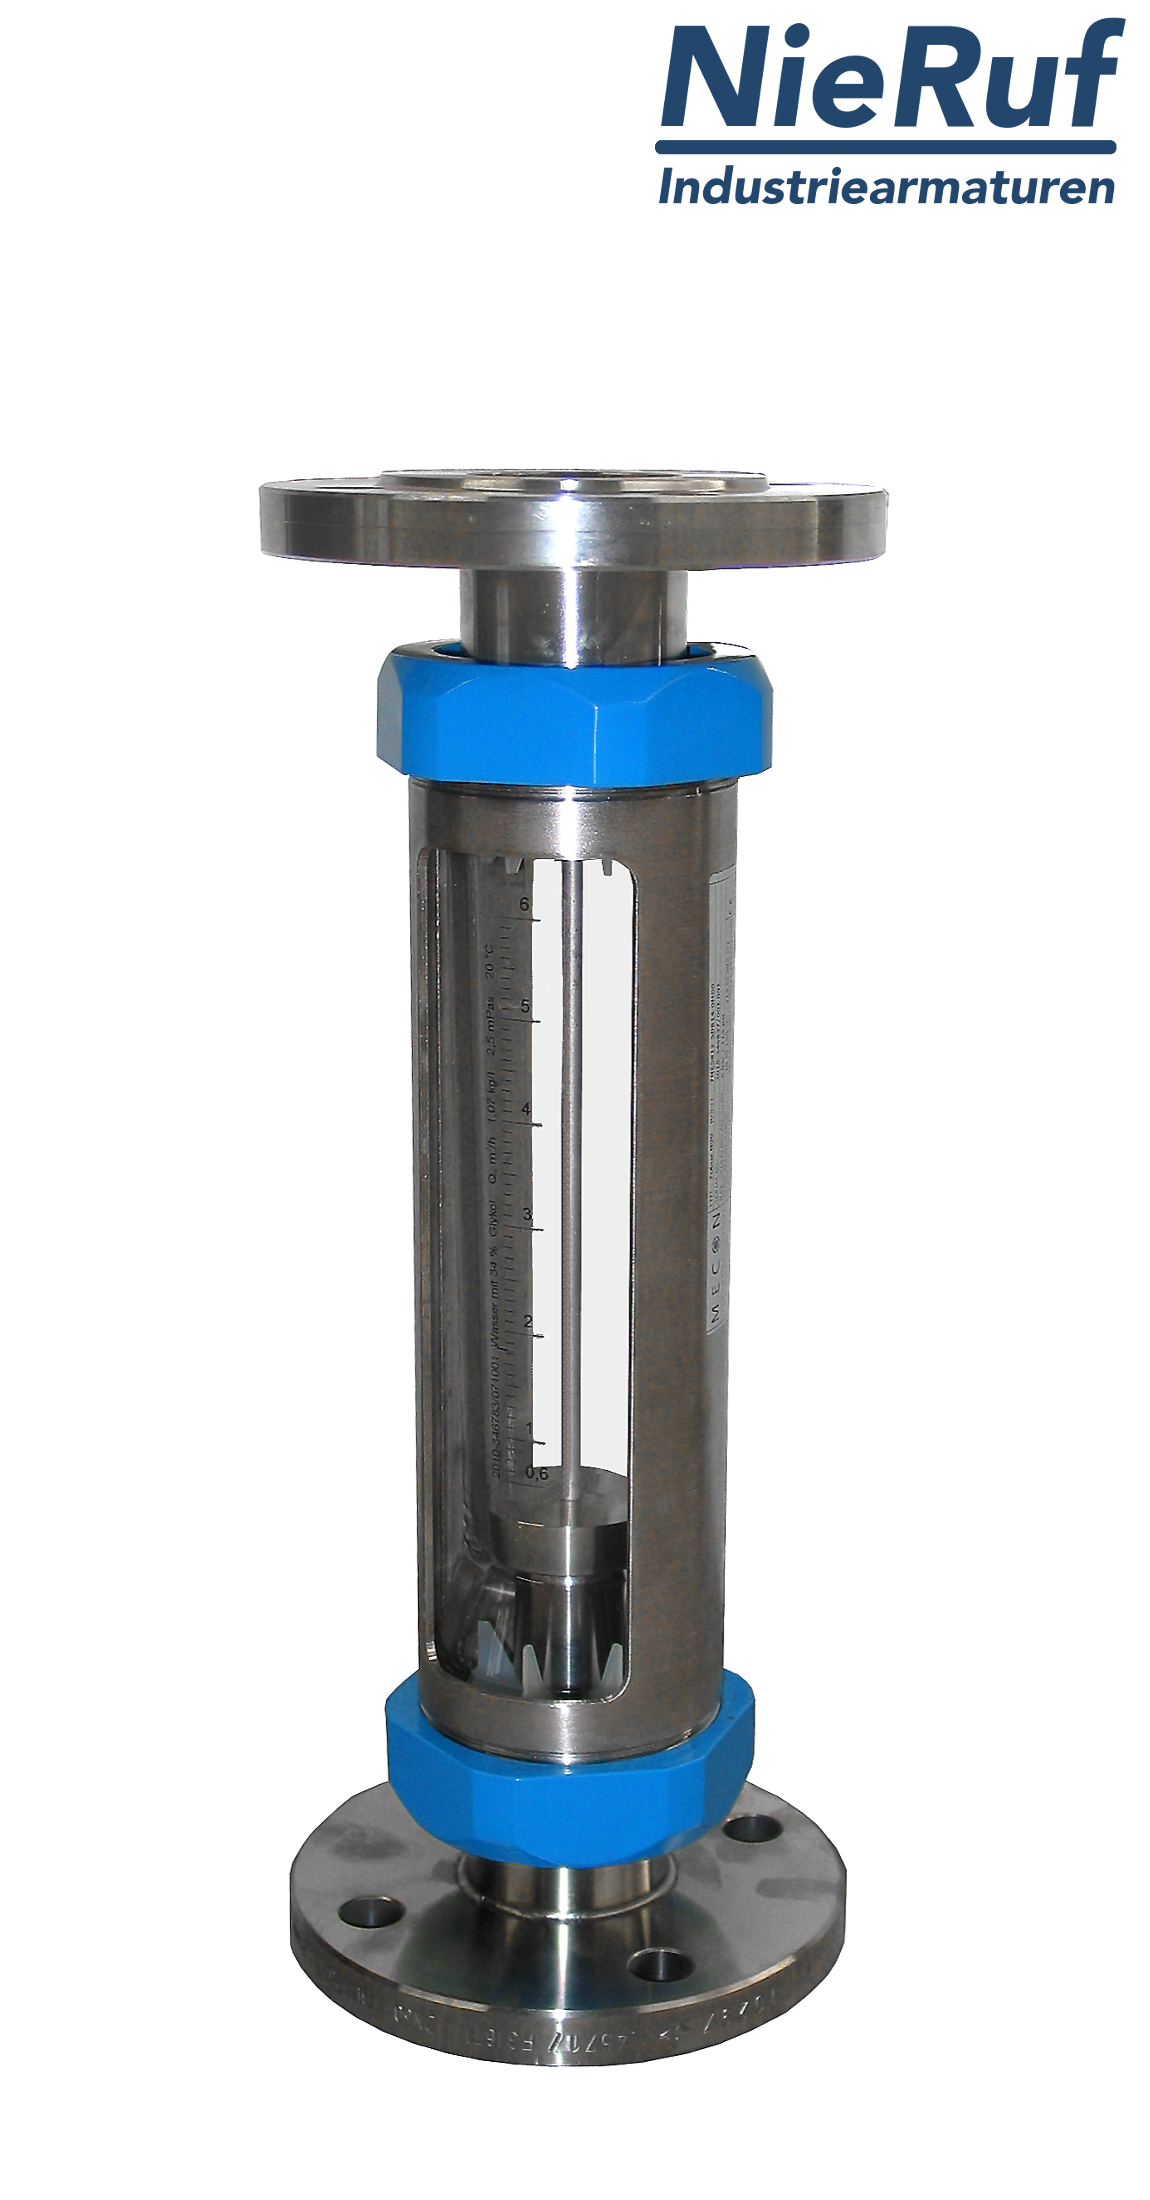 Variable area flowmeter stainless steel + borosilicate flange DN15 31.5 - 315.0 l/h water FKM